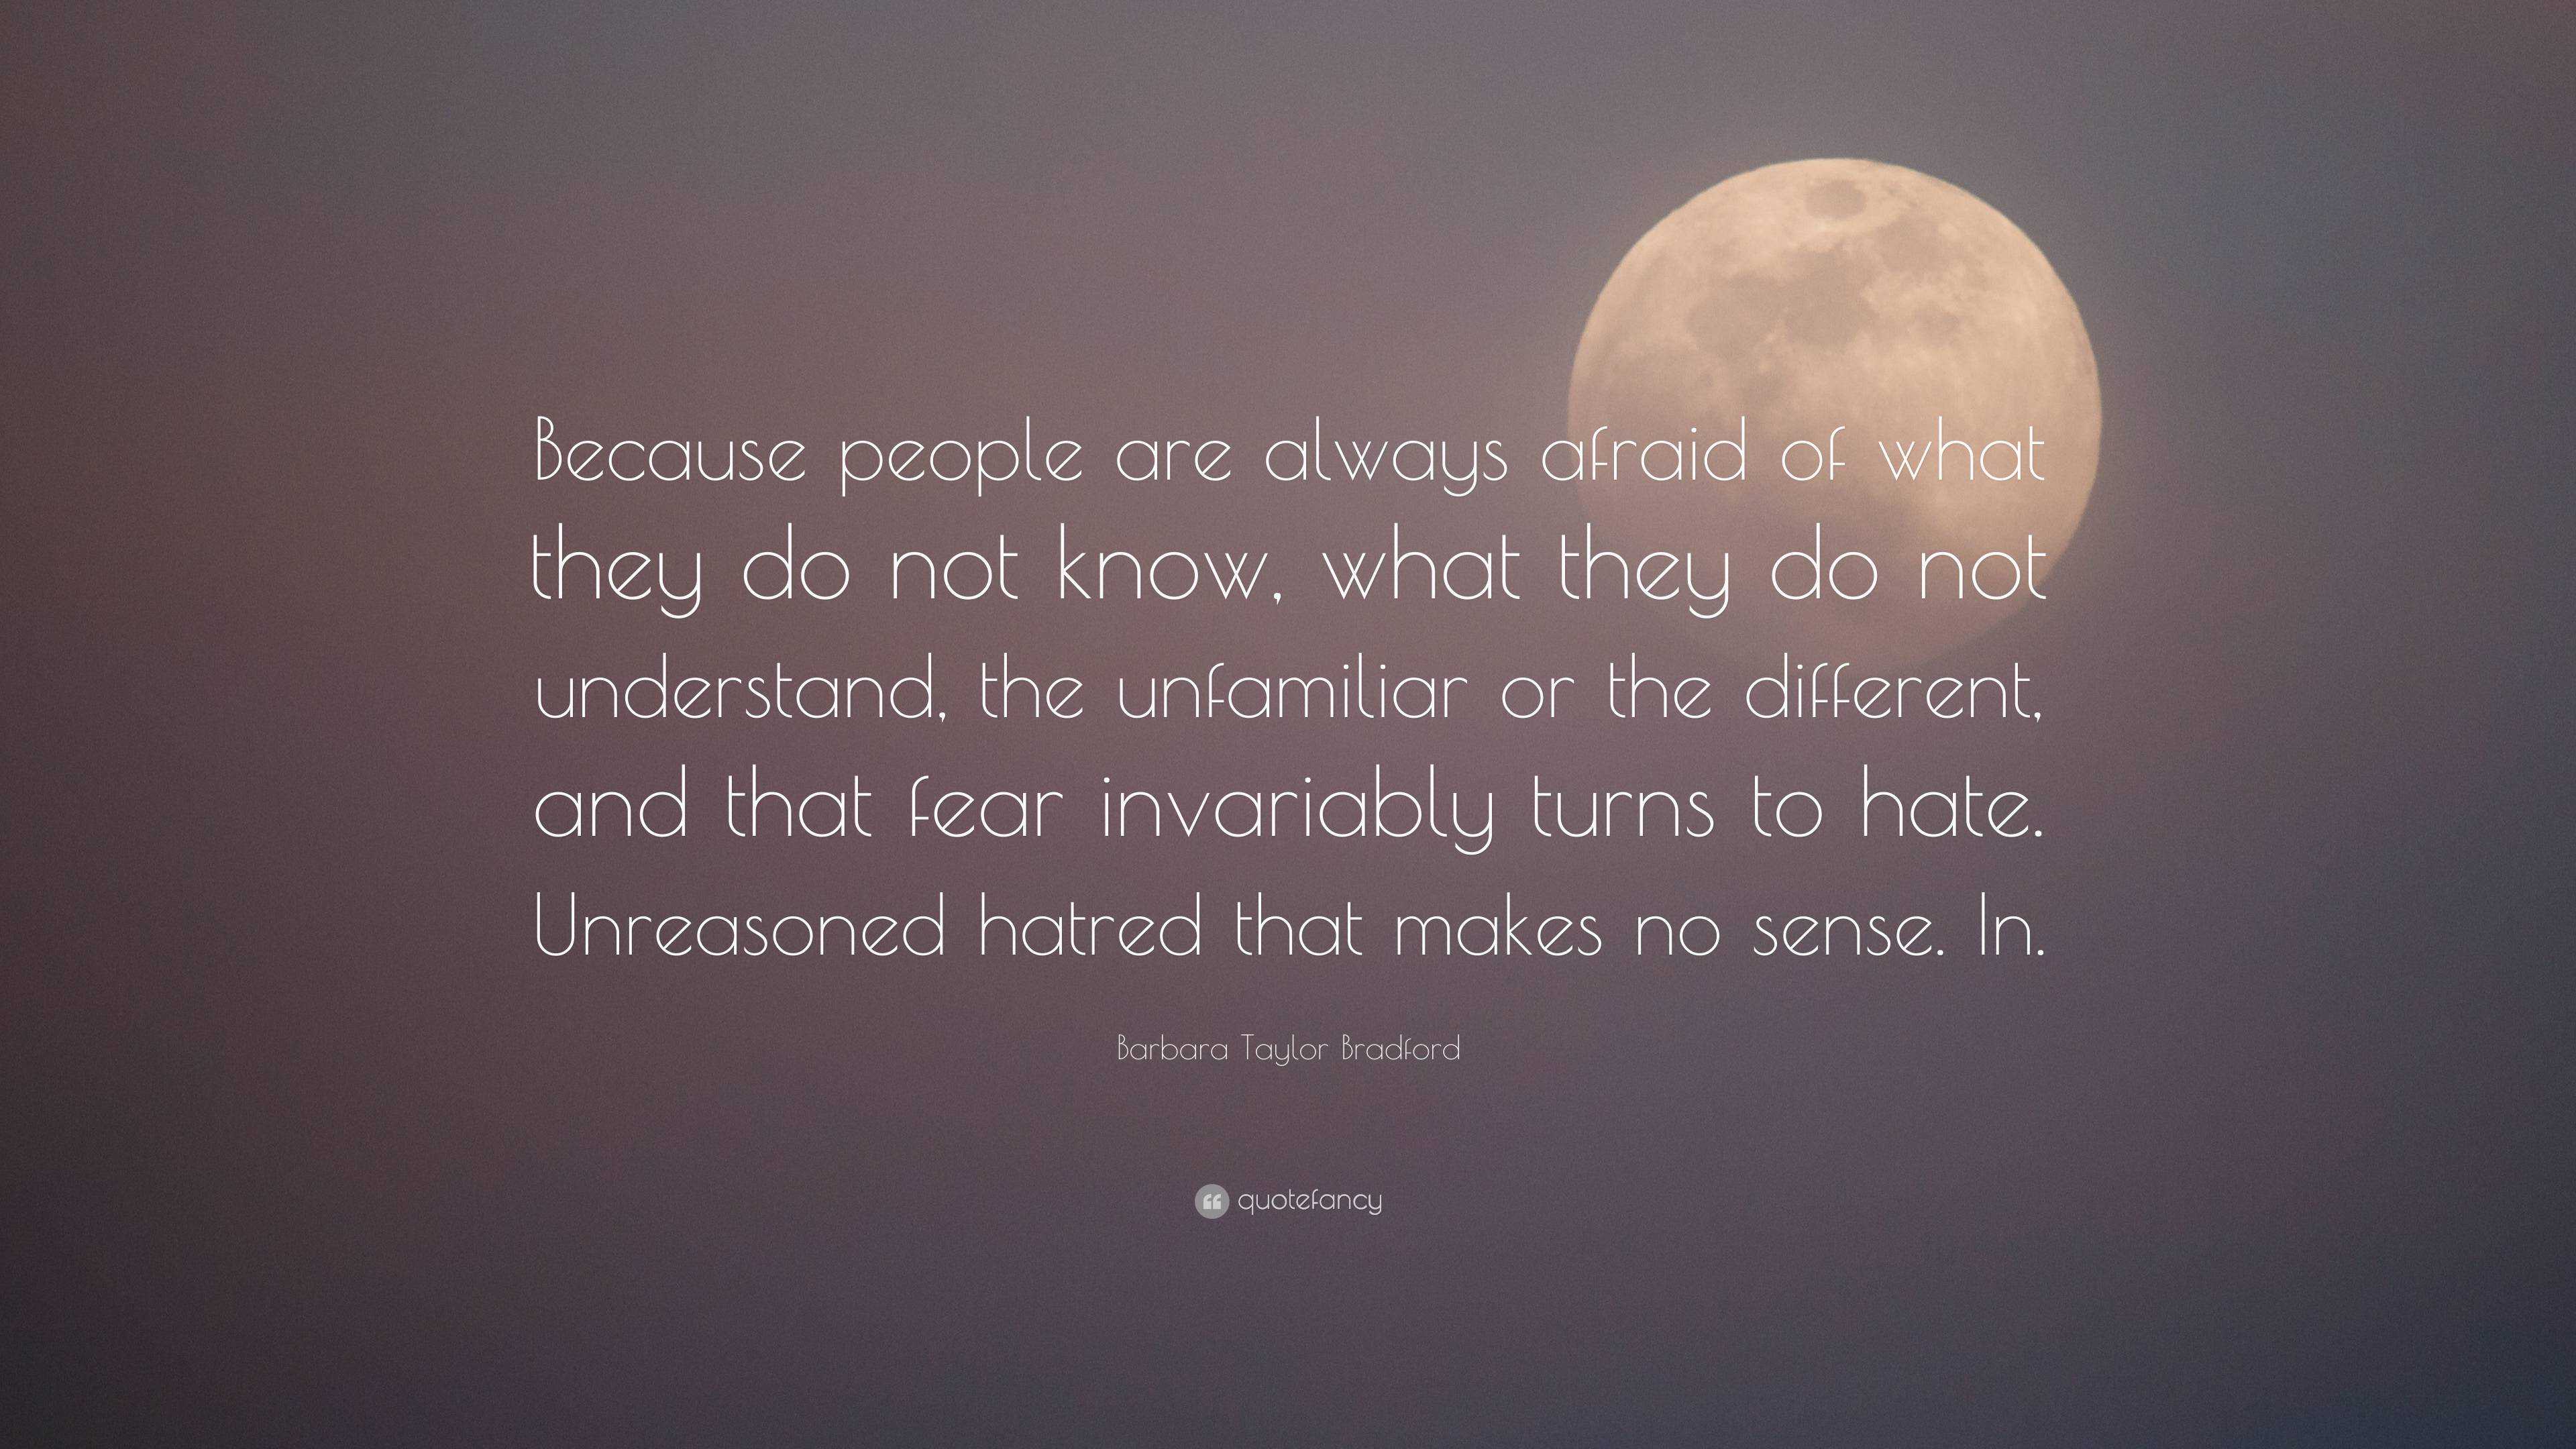 Barbara Taylor Bradford Quote: “Because people are always afraid of ...